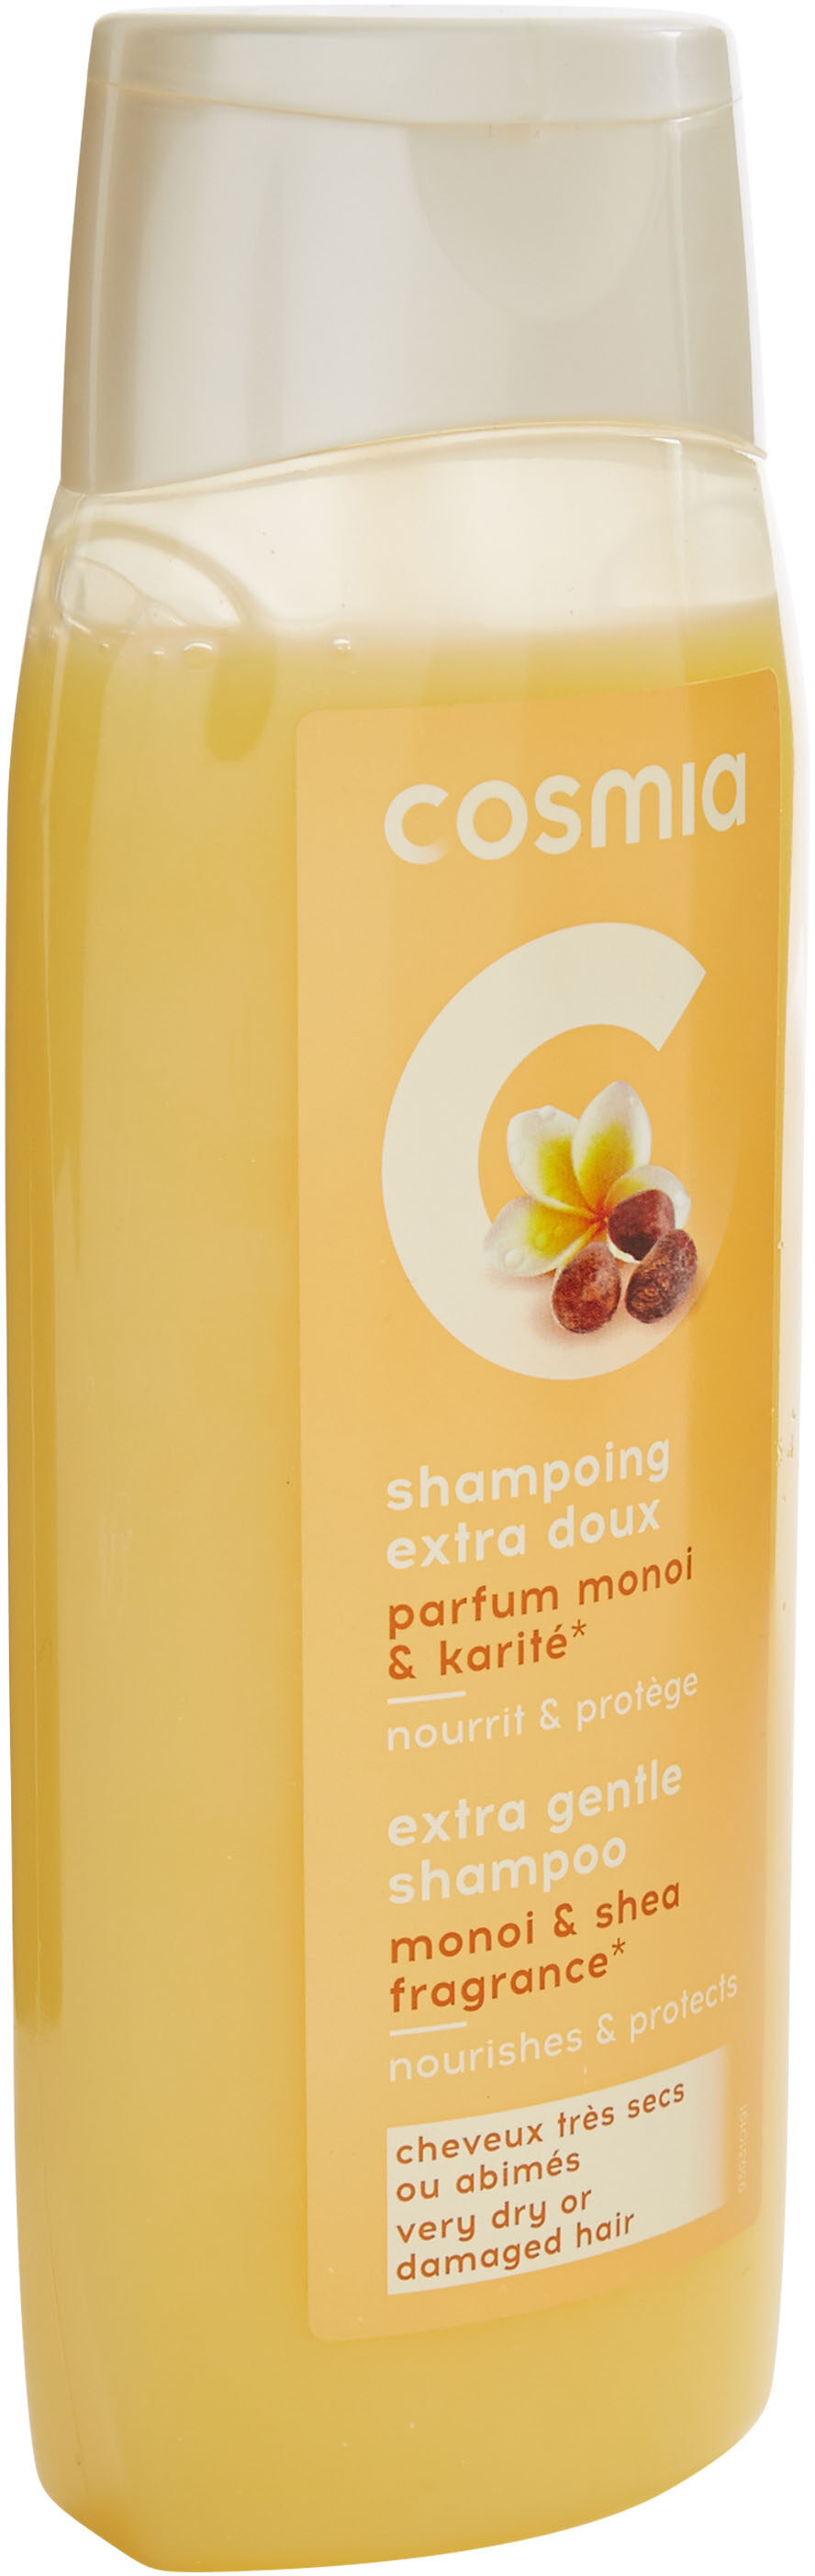 Shampoing extra doux - Product - en